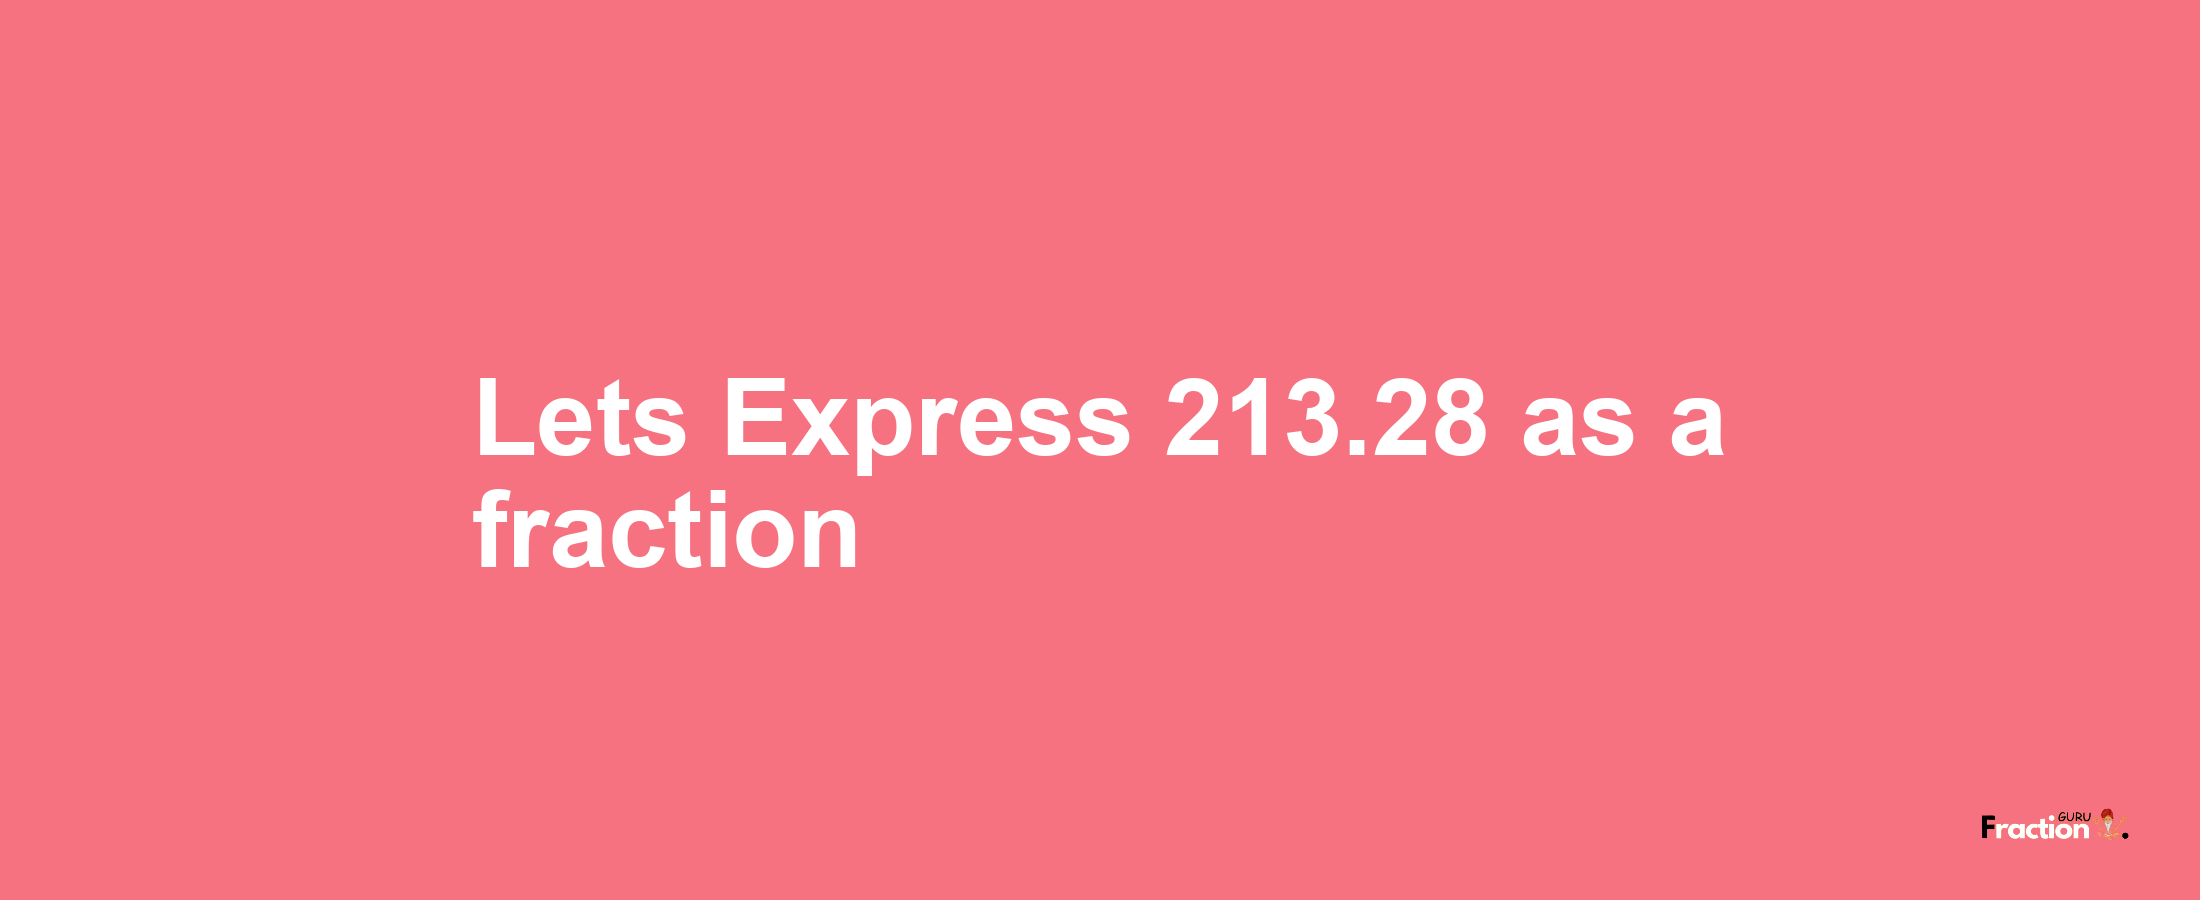 Lets Express 213.28 as afraction